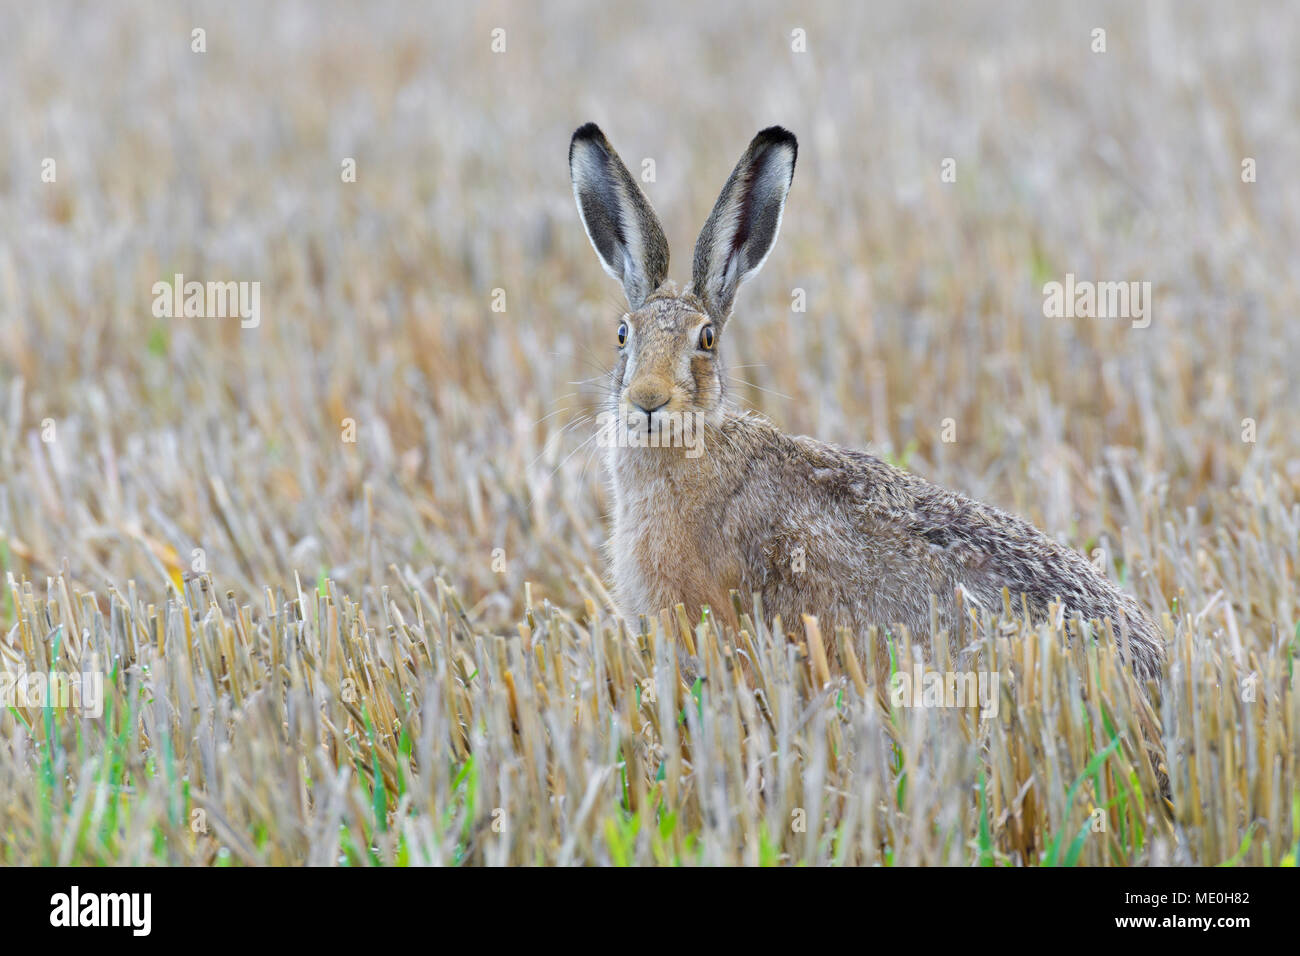 Portrait of a European brown hare (Lepus europaeus) sitting in a stubble field looking at camera in Hesse, Germany Stock Photo